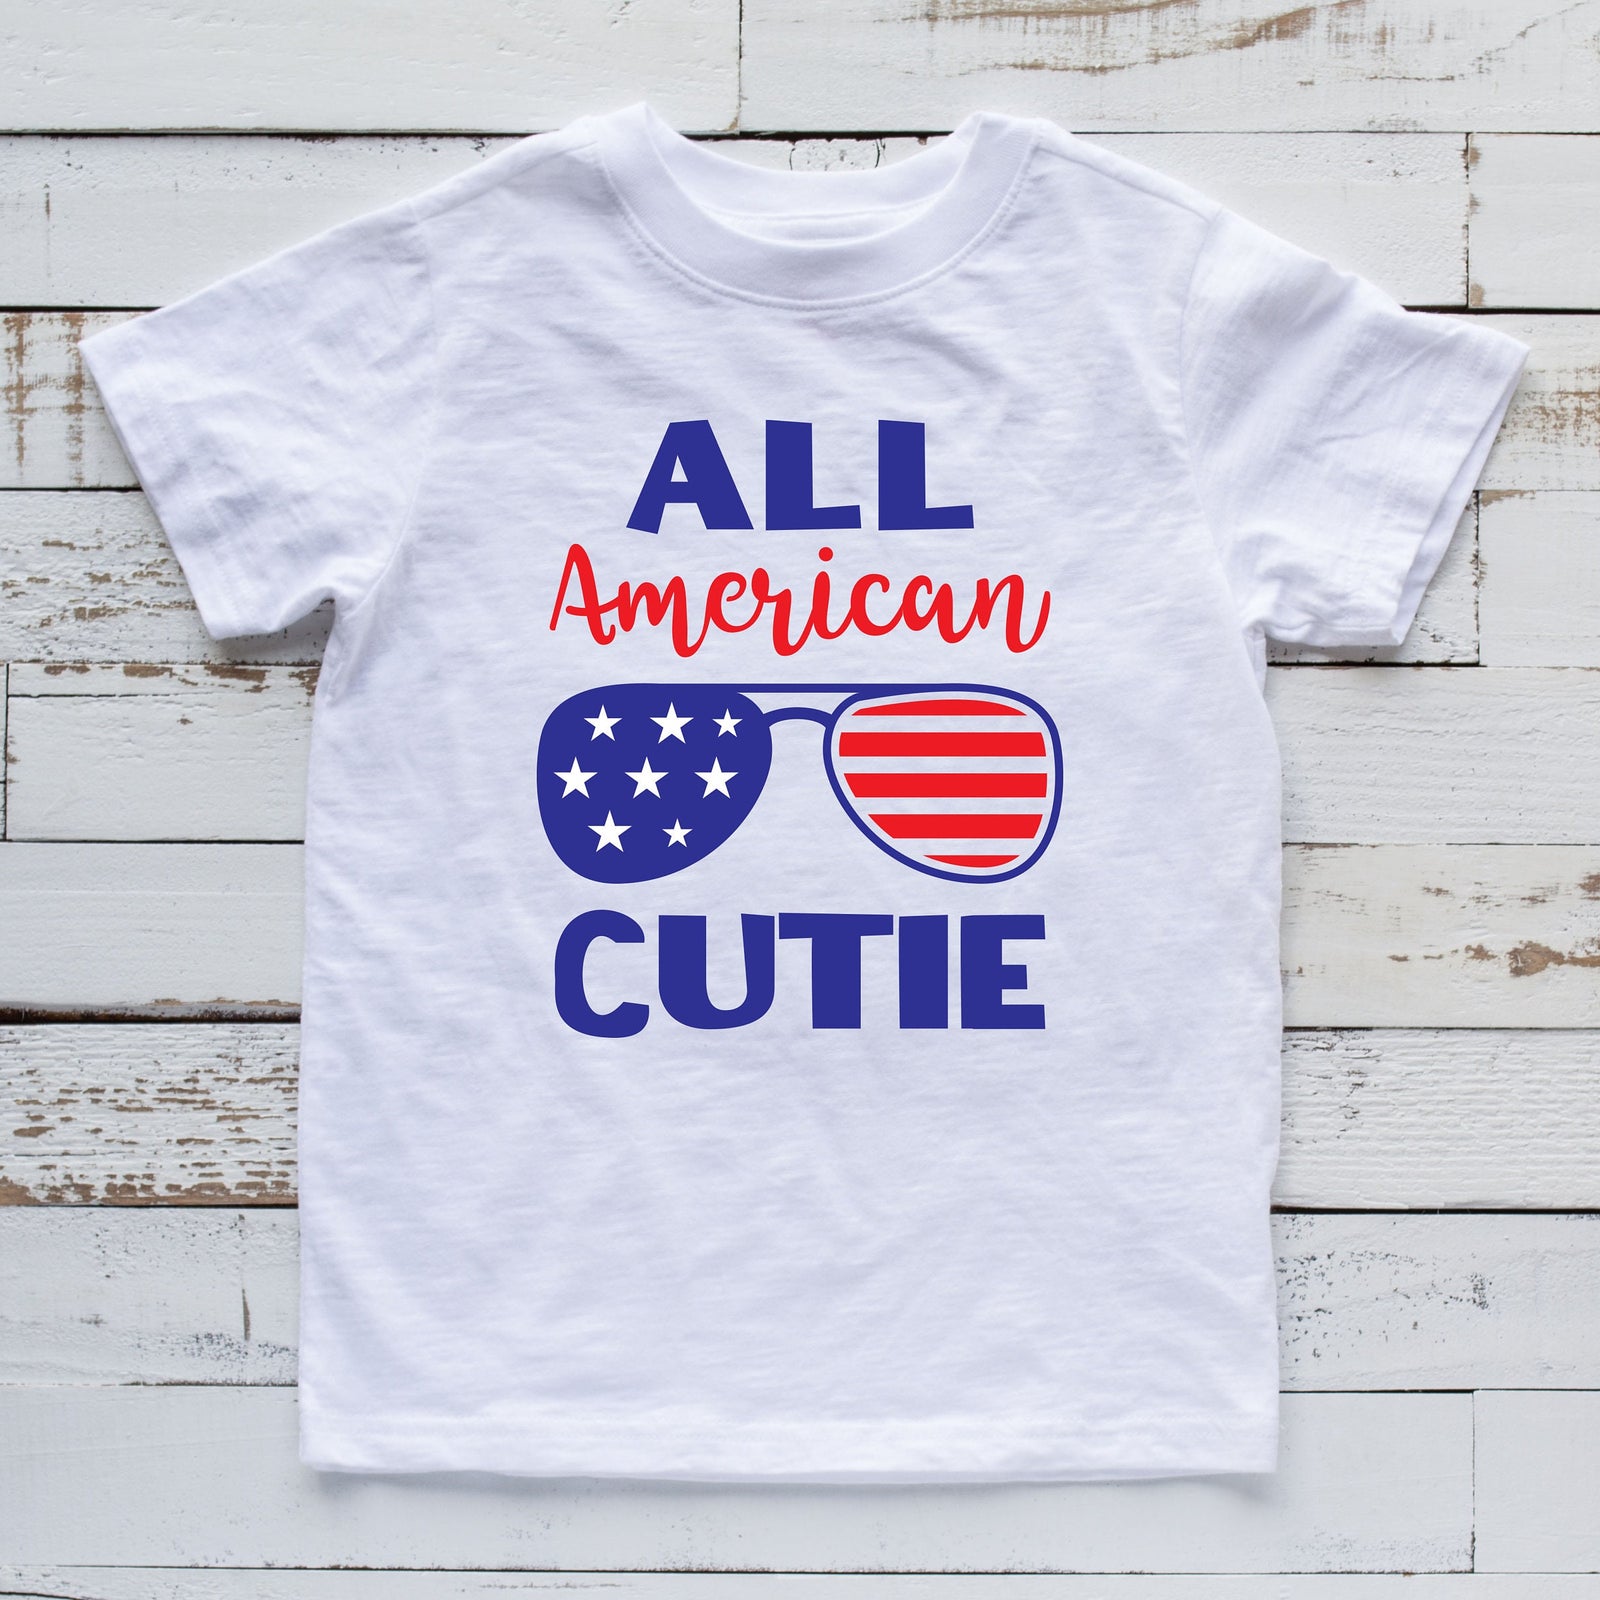 All American Cutie - Youth Fourth Of July Shirt - Memorial Day - Red White and Blue